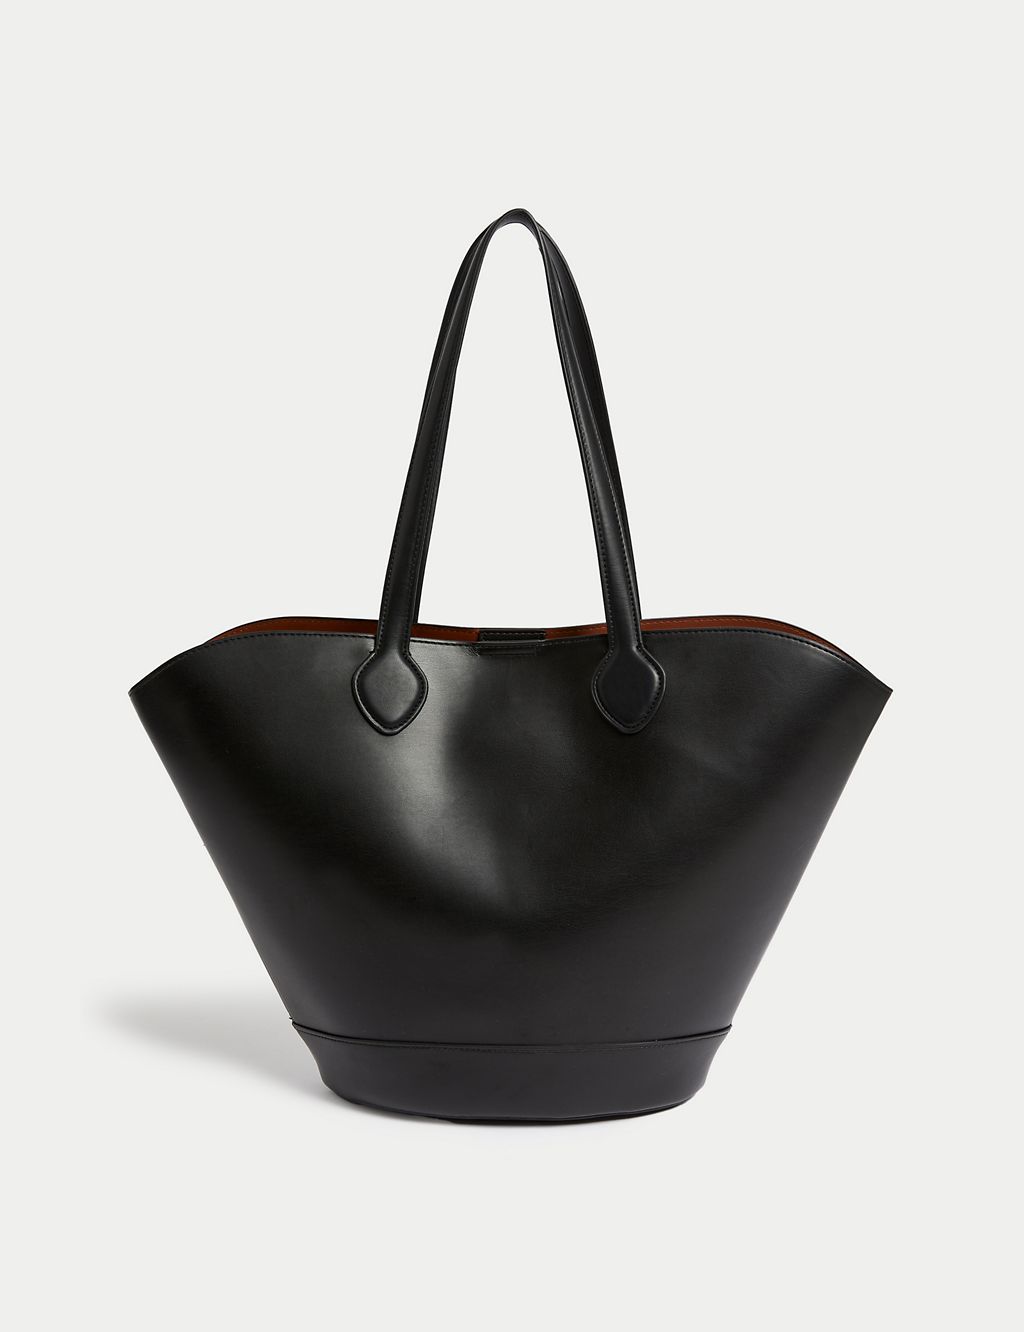 M&S Sequence + Faux Leather-based mostly Tote Glean